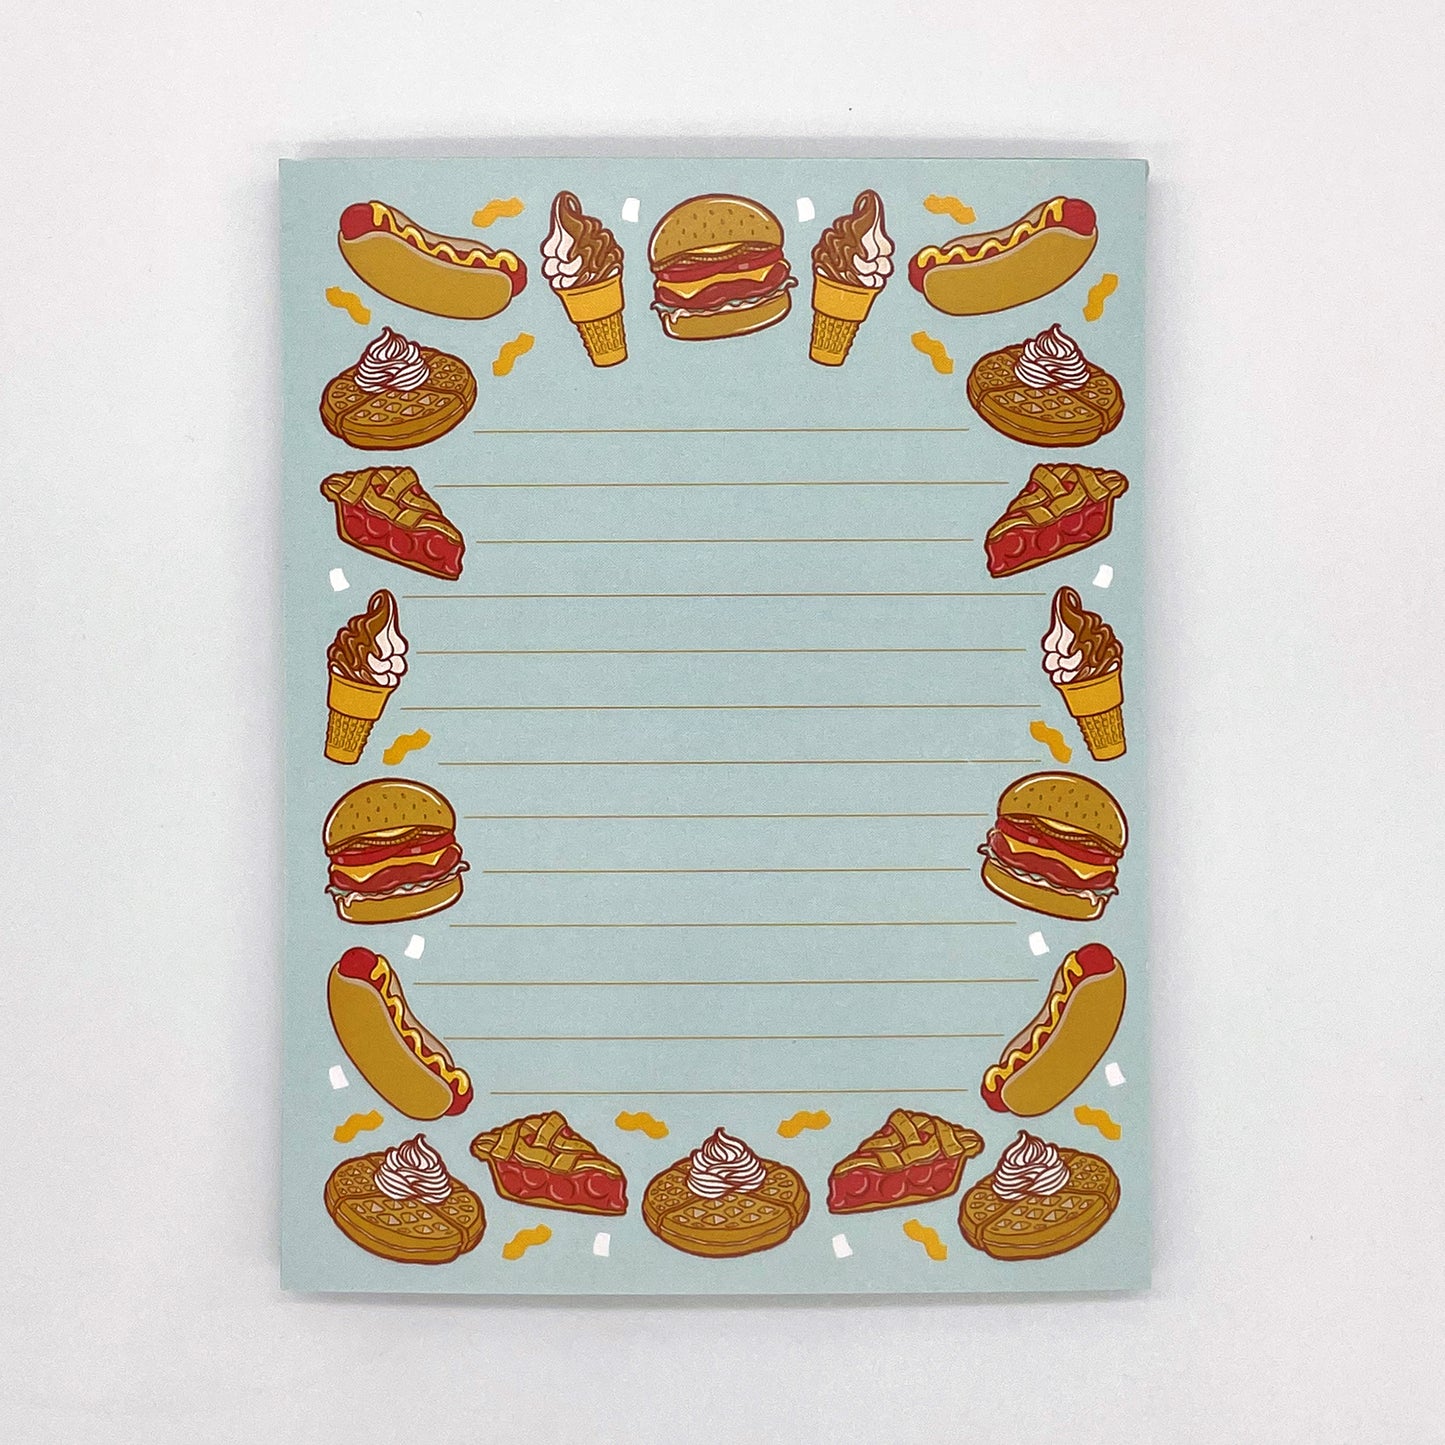 A blue lined notepad features illustrations of burgers, hot dogs, waffles, ice cream and pie.